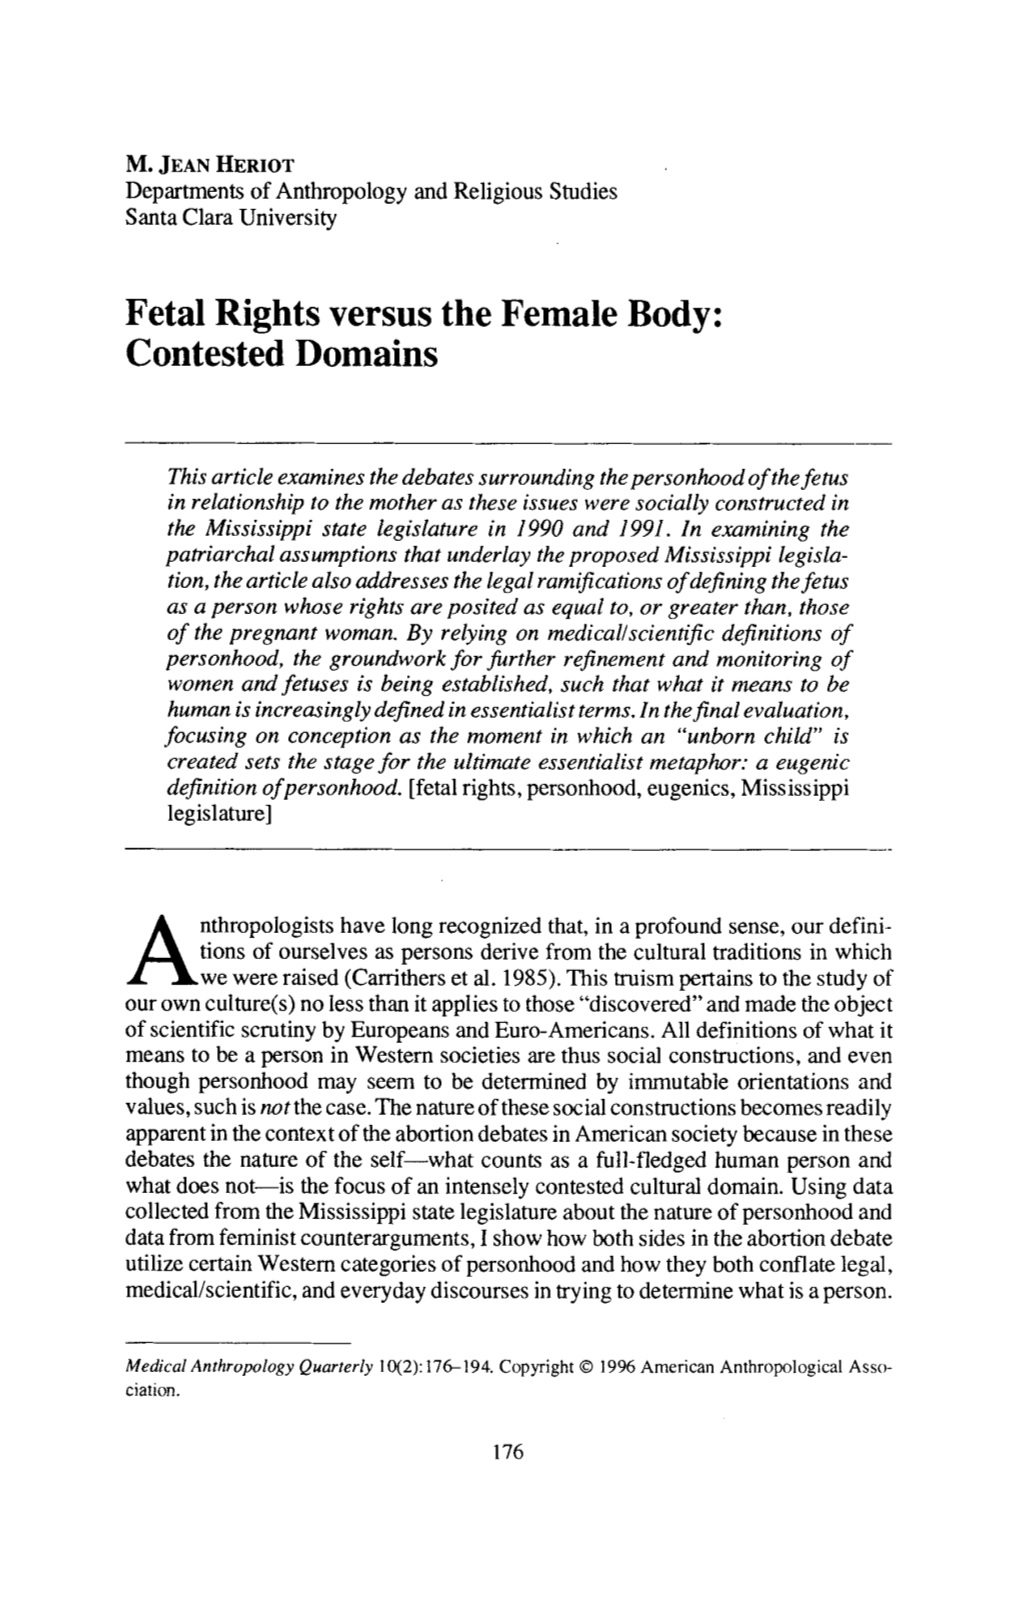 Fetal Rights Versus the Female Body: Contested Domains